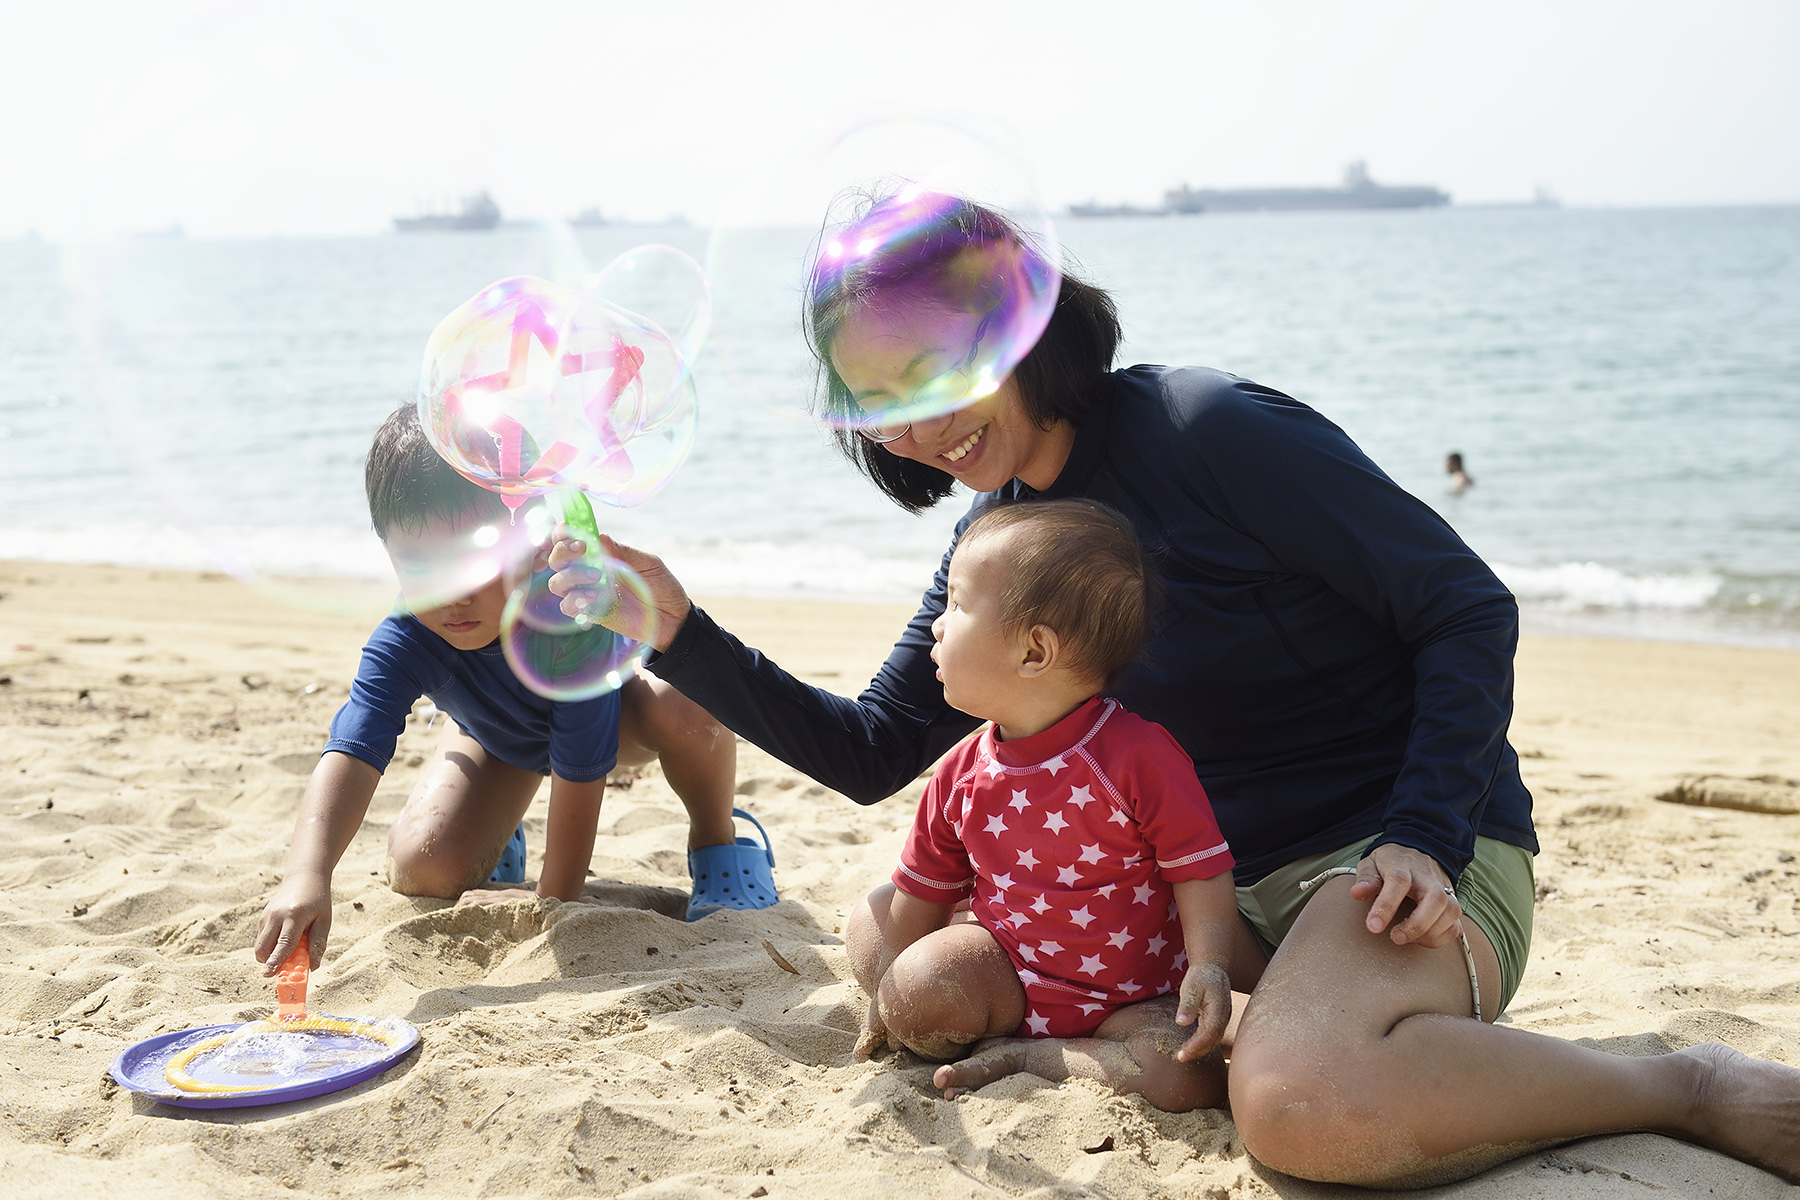 Mother plays with children on beach, blowing bubbles during their first week in Singapore 

